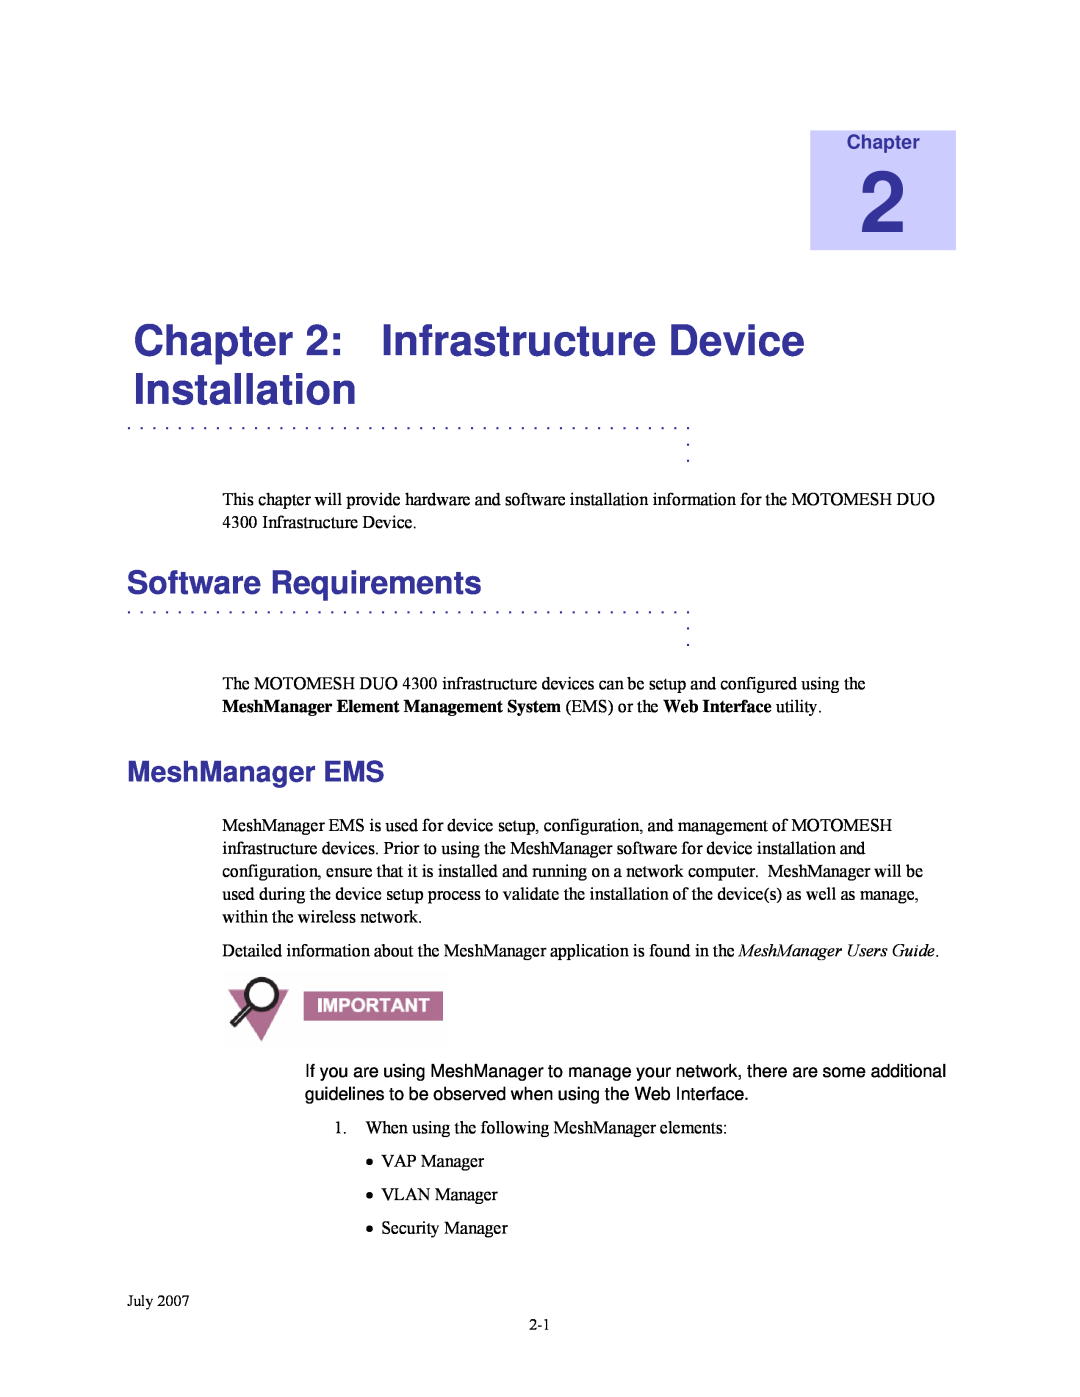 Nikon 4300 manual Infrastructure Device Installation, Software Requirements, MeshManager EMS, Chapter 